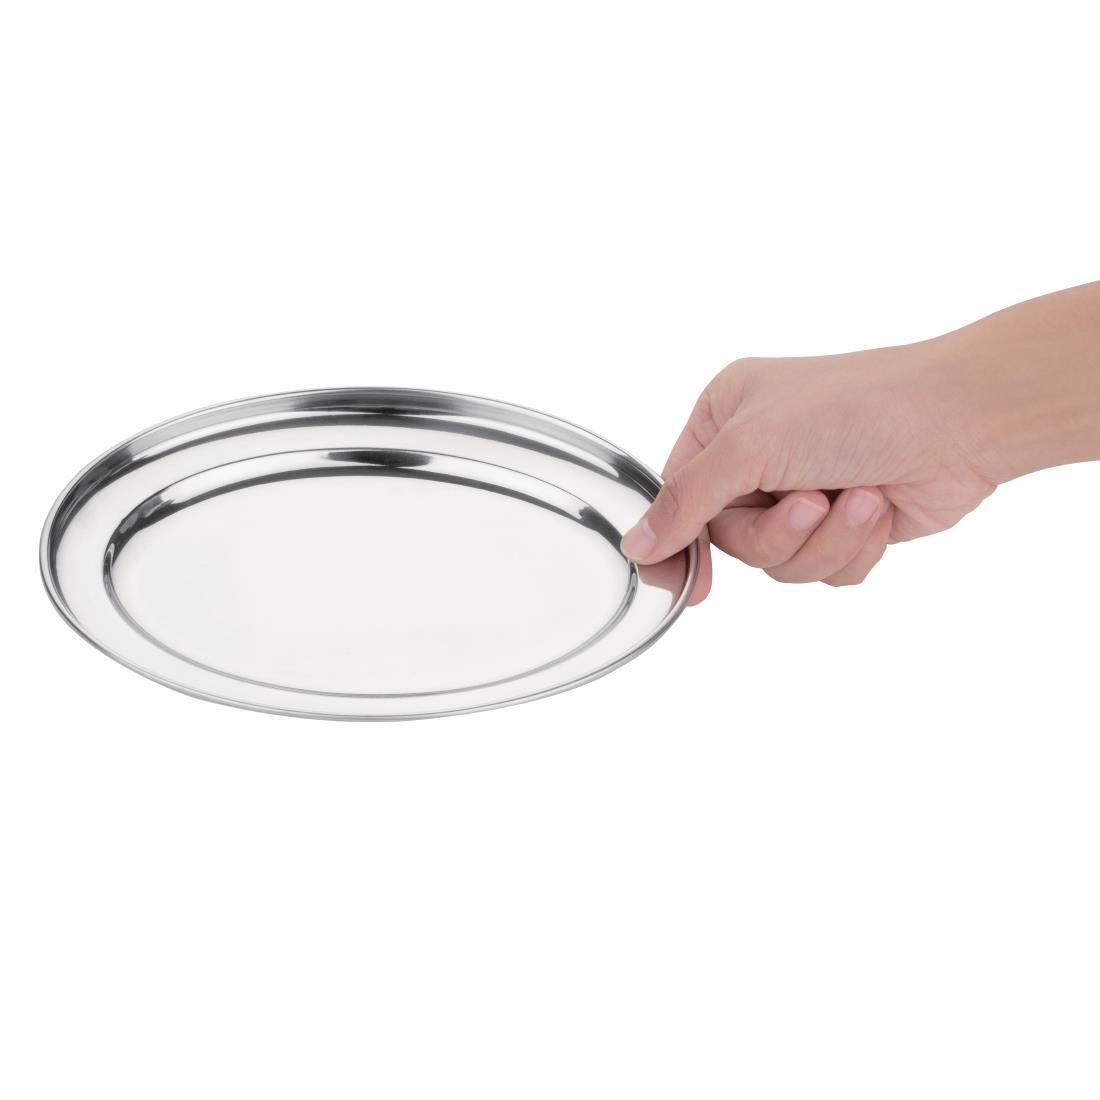 Olympia Stainless Steel Oval Serving Tray 220mm - K361  - 6